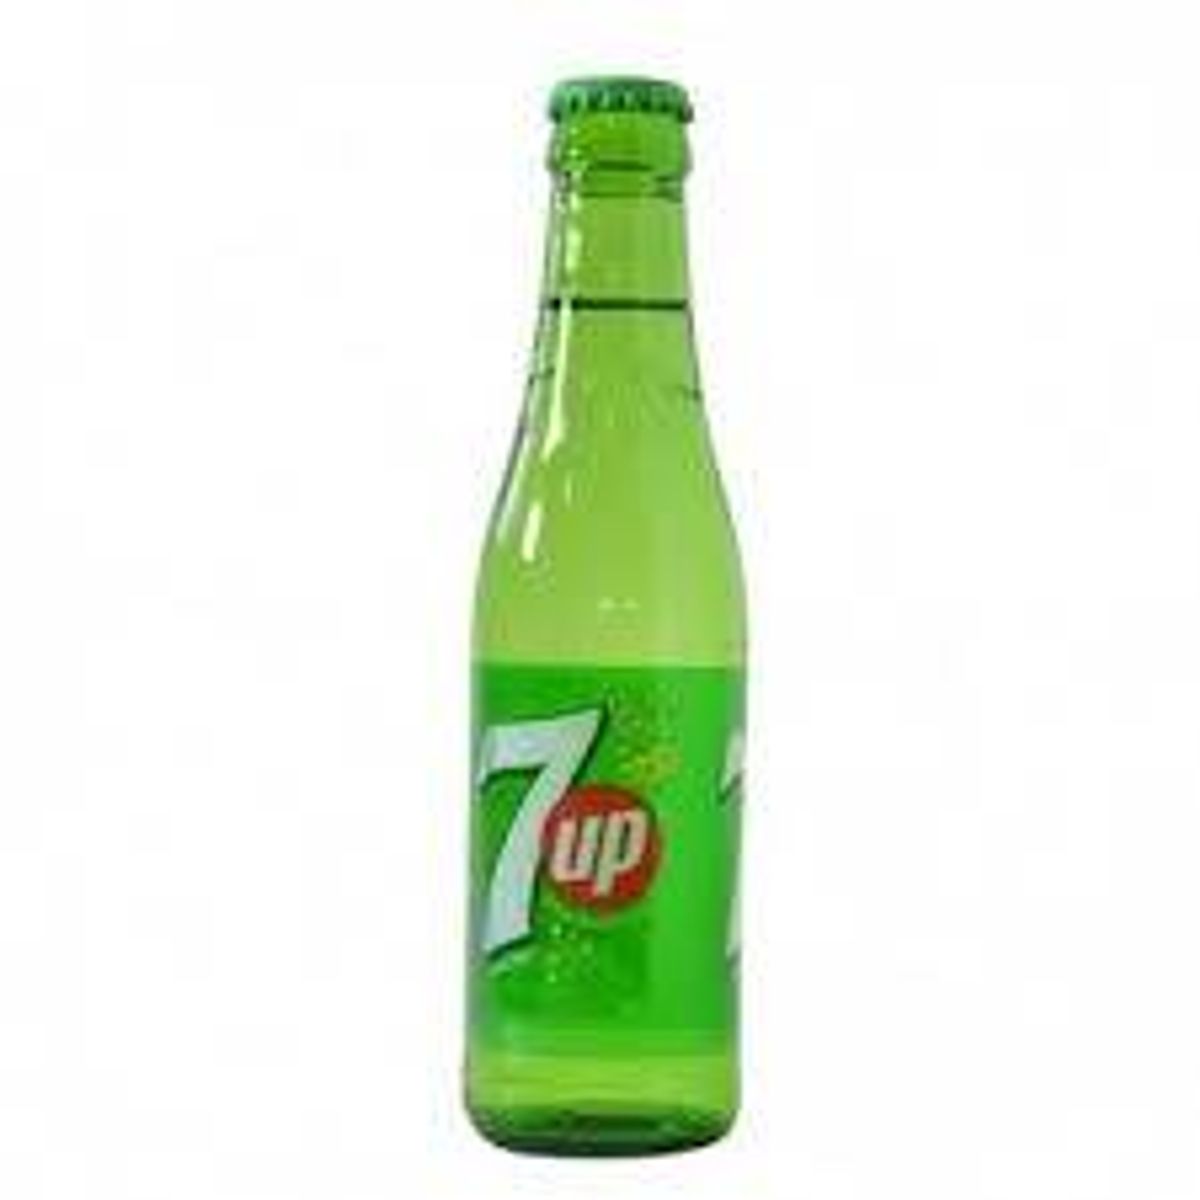  7 up